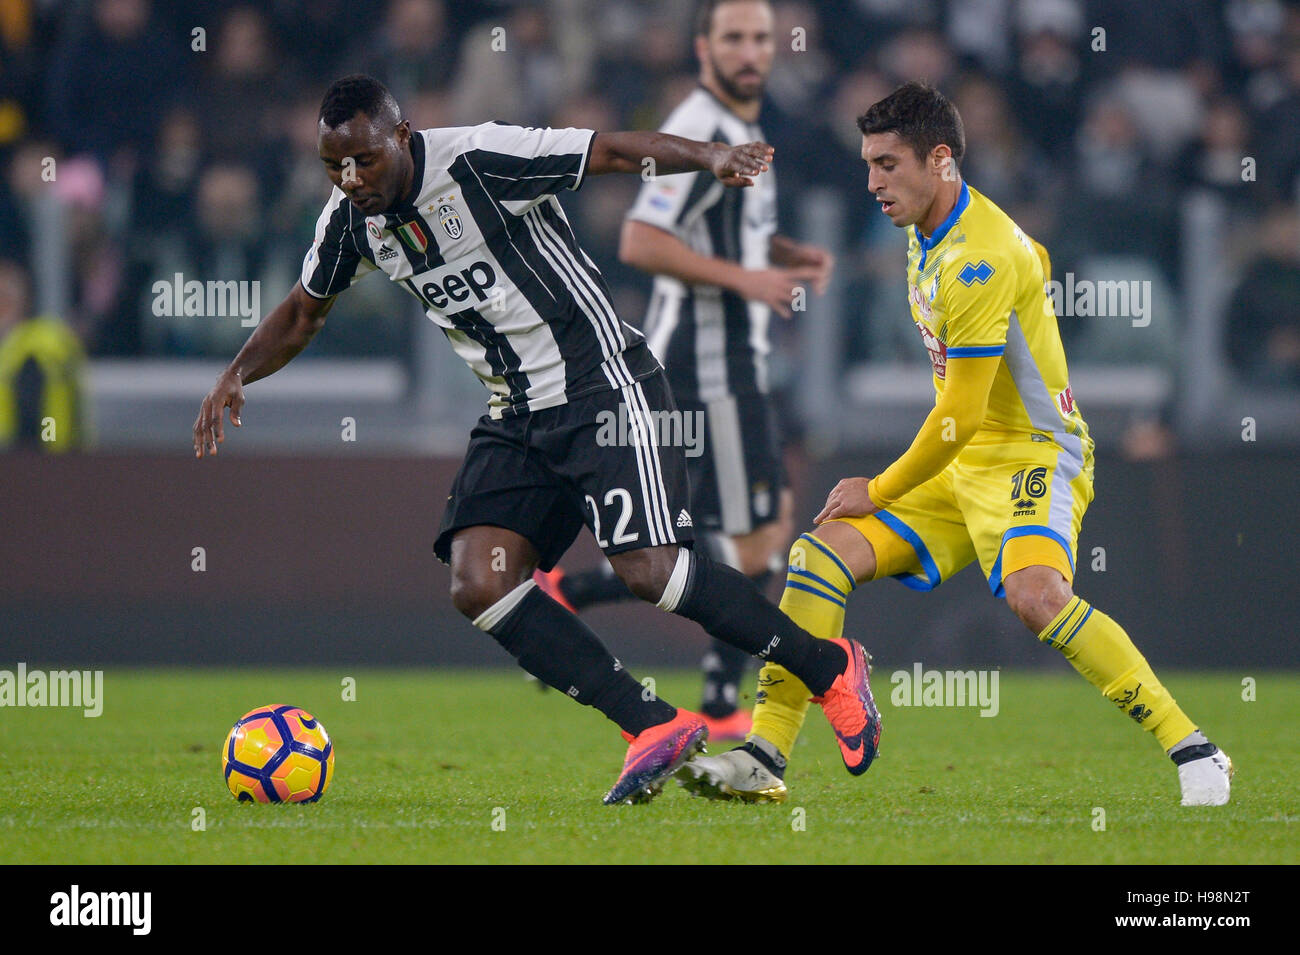 Turin, Italy. 19th November, 2016. Kwadwo Asamoah (left) of Juventus FC nad Gaston Brugman of Pescara Calcio compete for the ball during the Serie A football match between Juventus FC and Pescara Calcio. Credit:  Nicolò Campo/Alamy Live News Stock Photo